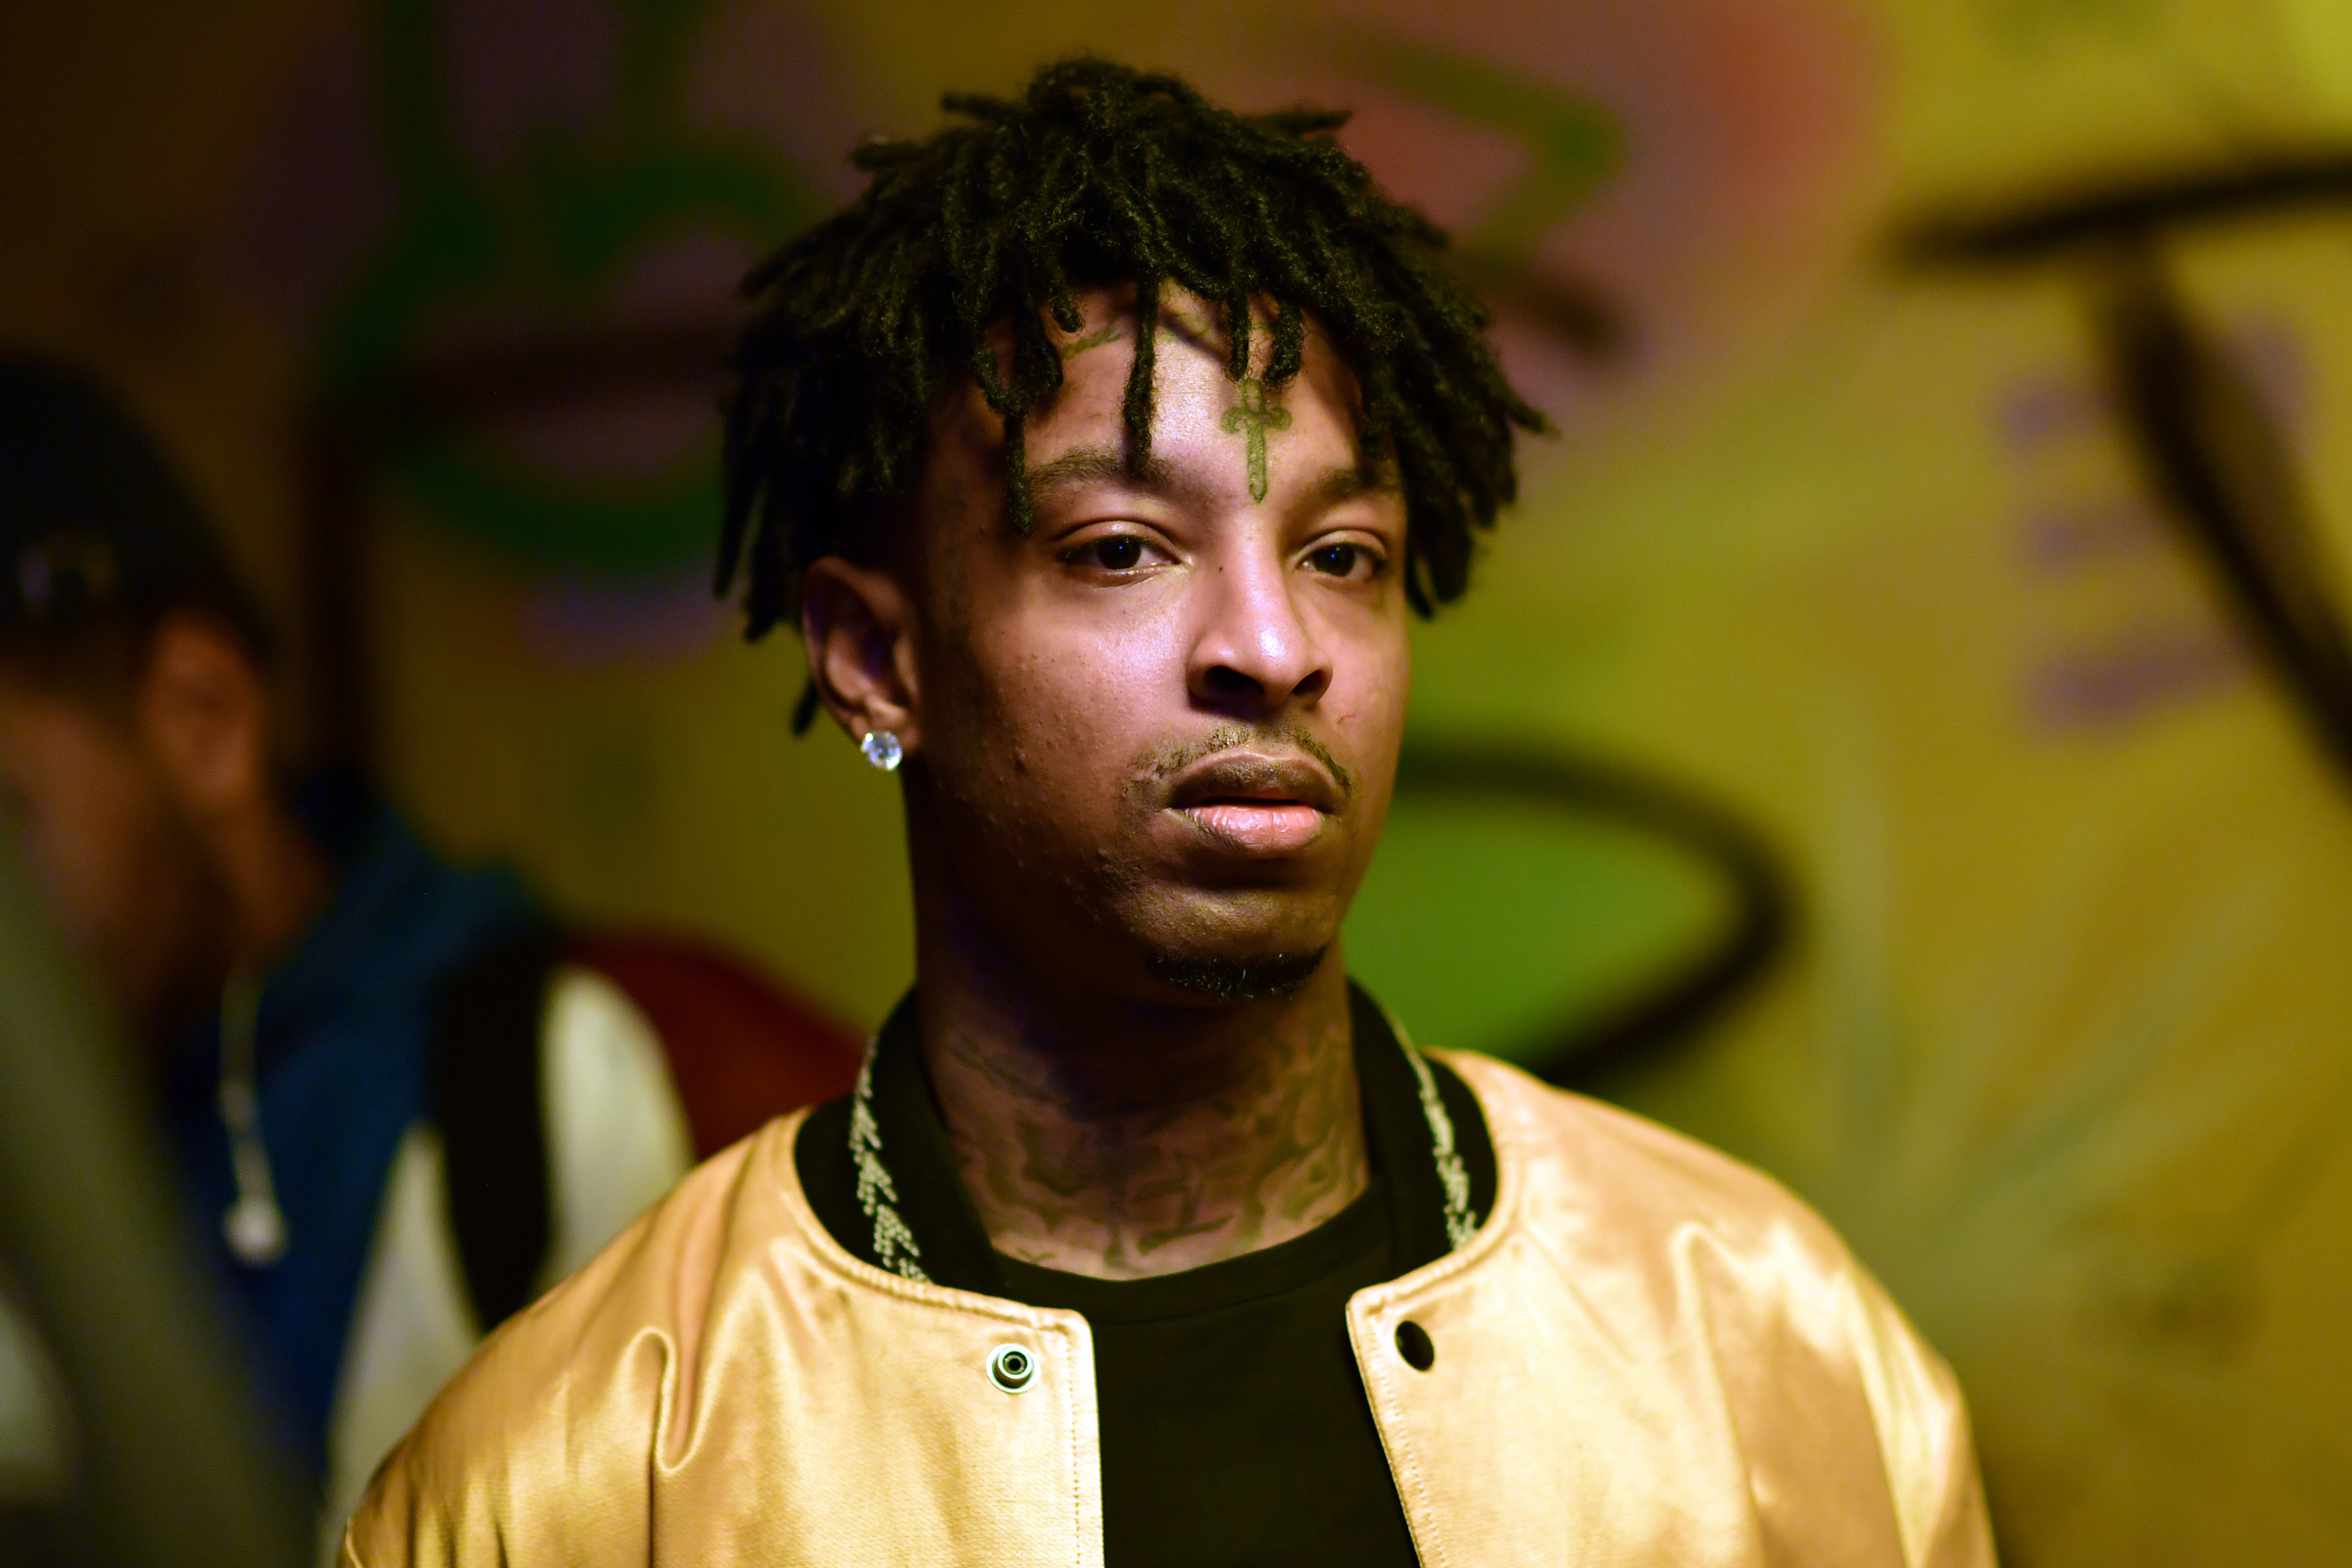 21 Savage Performed at Comerica Theatre on July 16, 2019